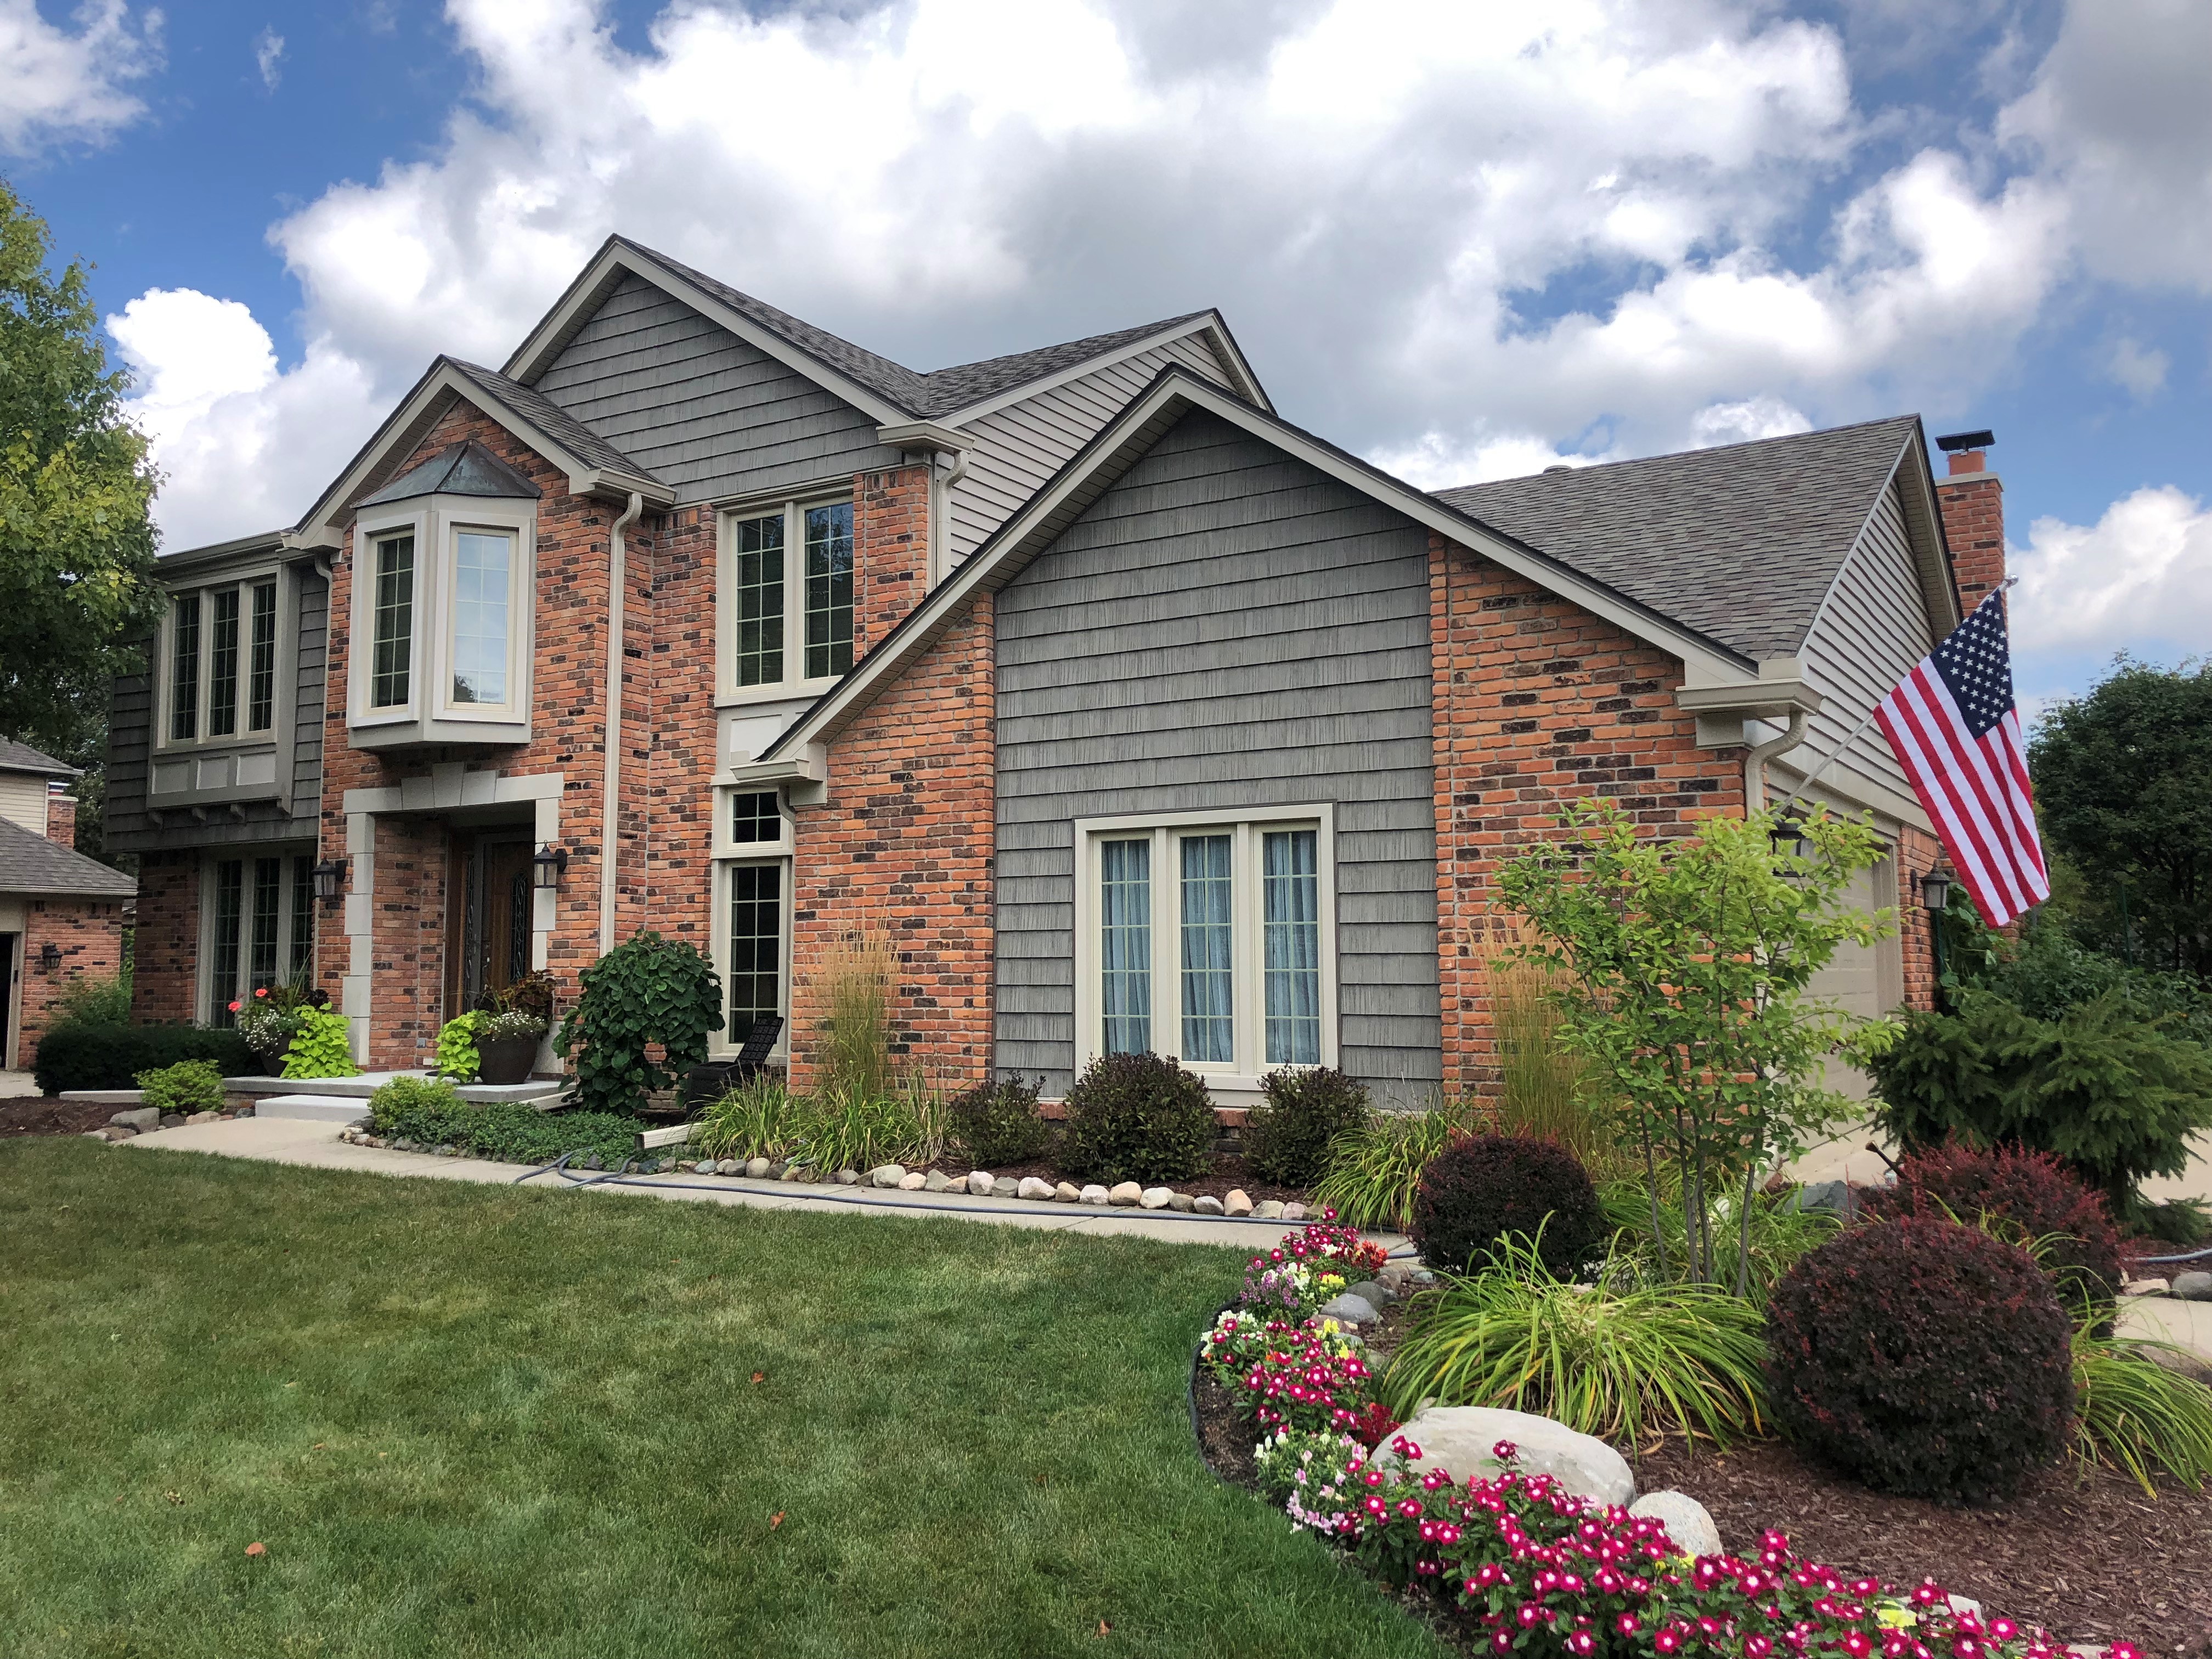 Livonia & Allen Park's top choice for roofing, siding, gutter, door, and window replacement. We're t Crown Pro Construction Allen Park (734)686-0620